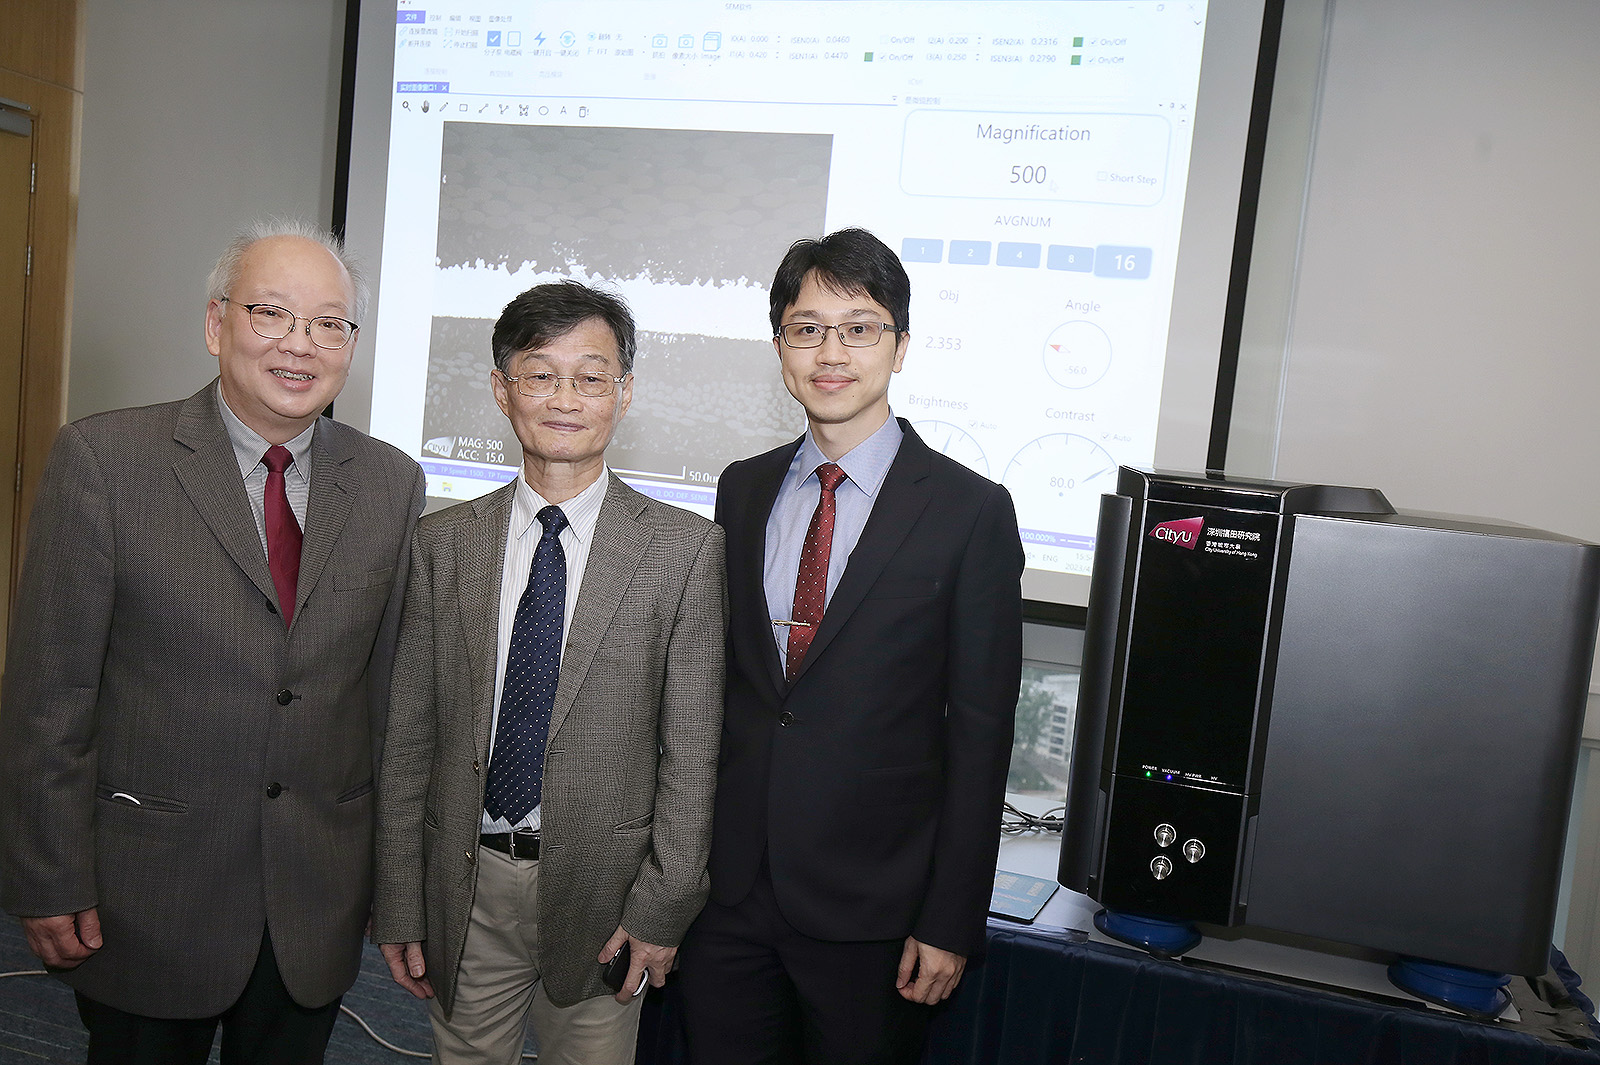 Professor Chan Chi Hou, Acting President (from left), Prof Chen Fu-rong, Chair Professor in the Department of Materials Science and Engineering, Director of the Time-Resolved Aberration-Corrected Environmental EM Unit (TRACE) and Director of the Shenzhen Futian Research Institute; and Dr Hsueh Yu-chun, Research Fellow, TRACE.